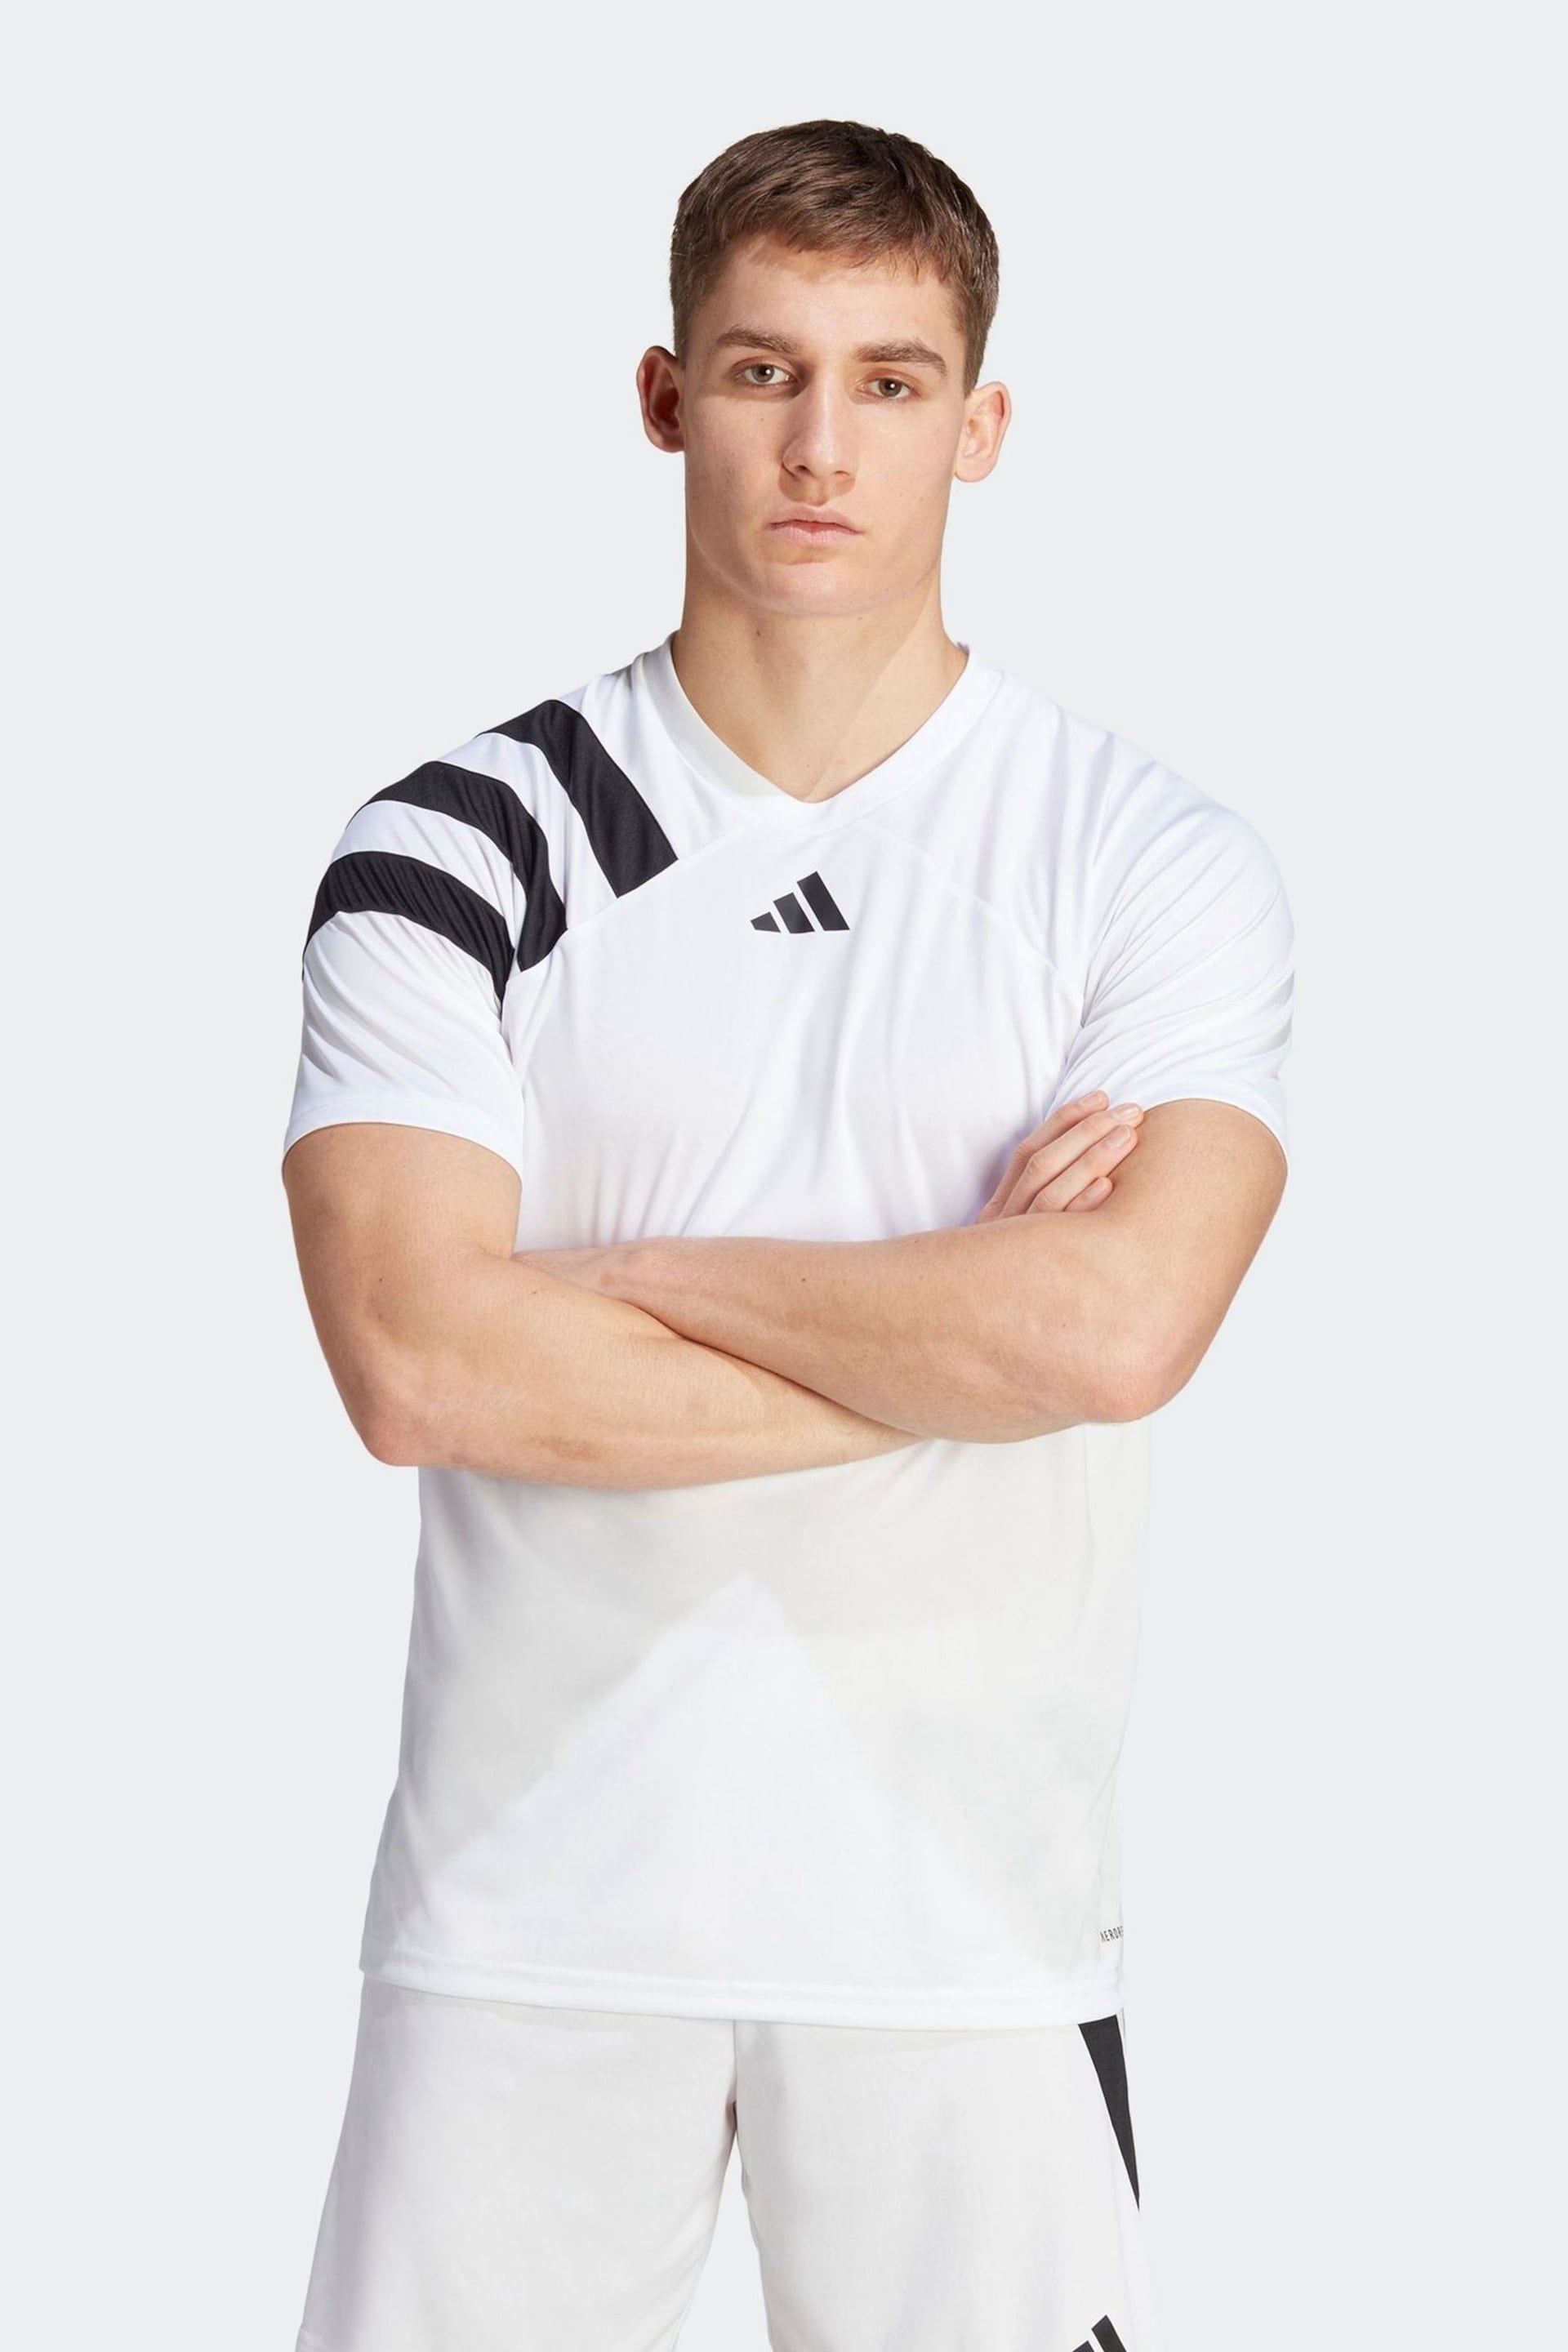 adidas White Fortore 23 Jersey - Image 1 of 8